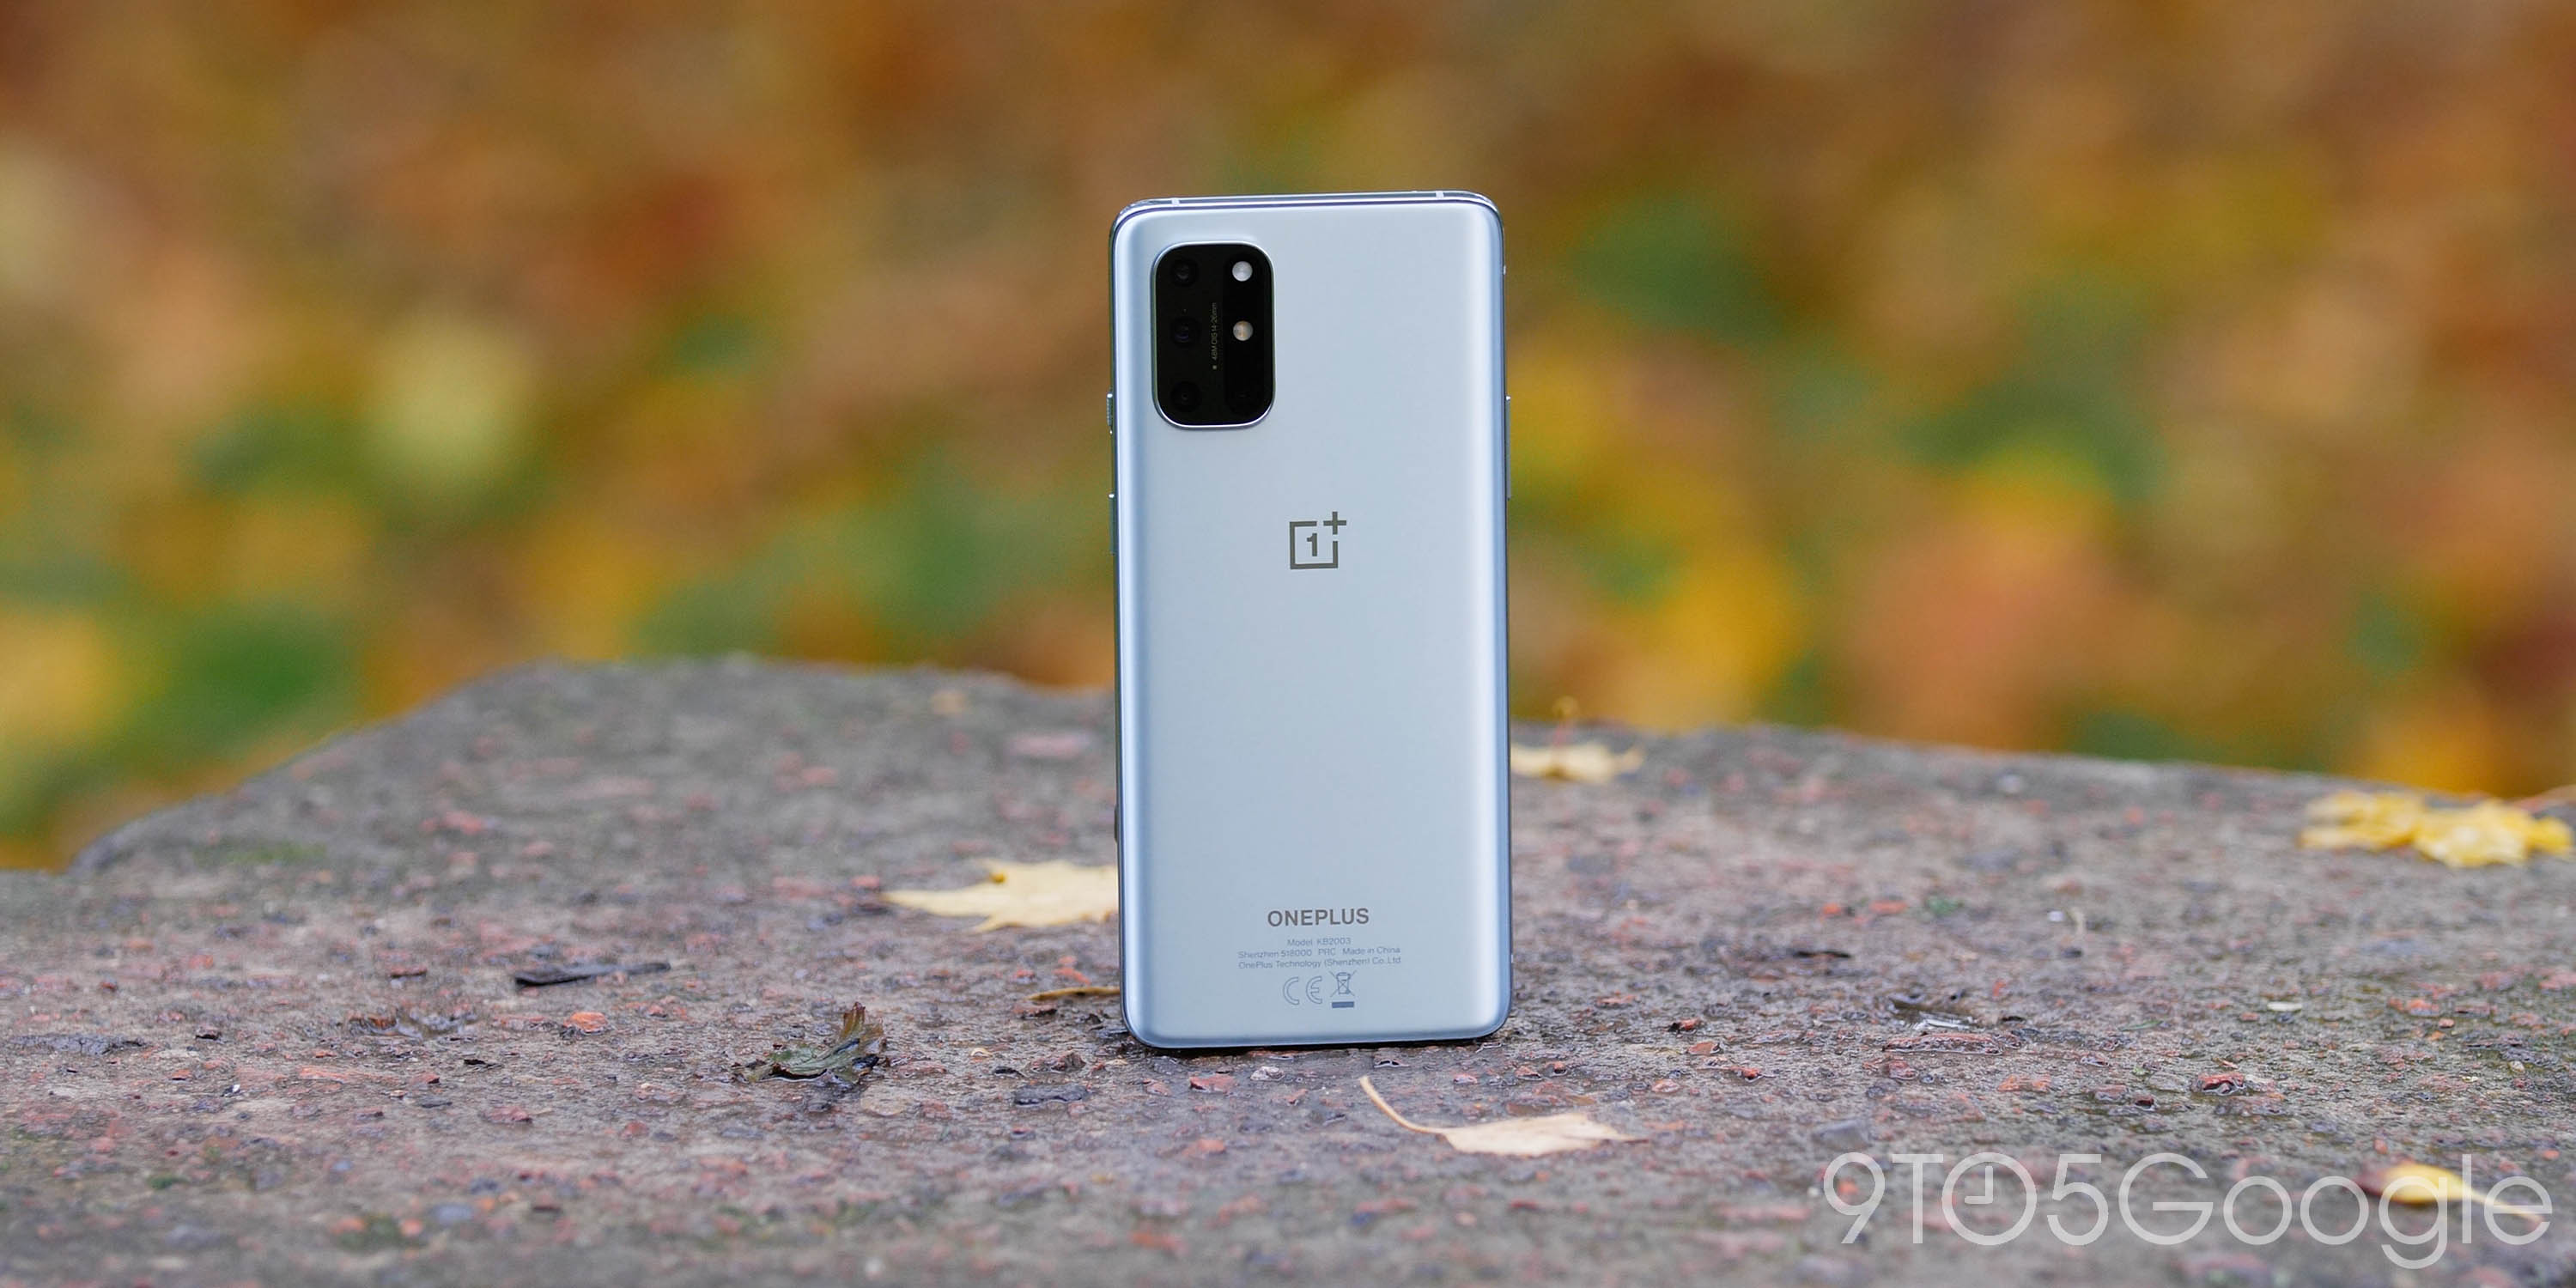 Oneplus 9 Lite May Be A Budget Model W Snapdragbon 865 9to5google